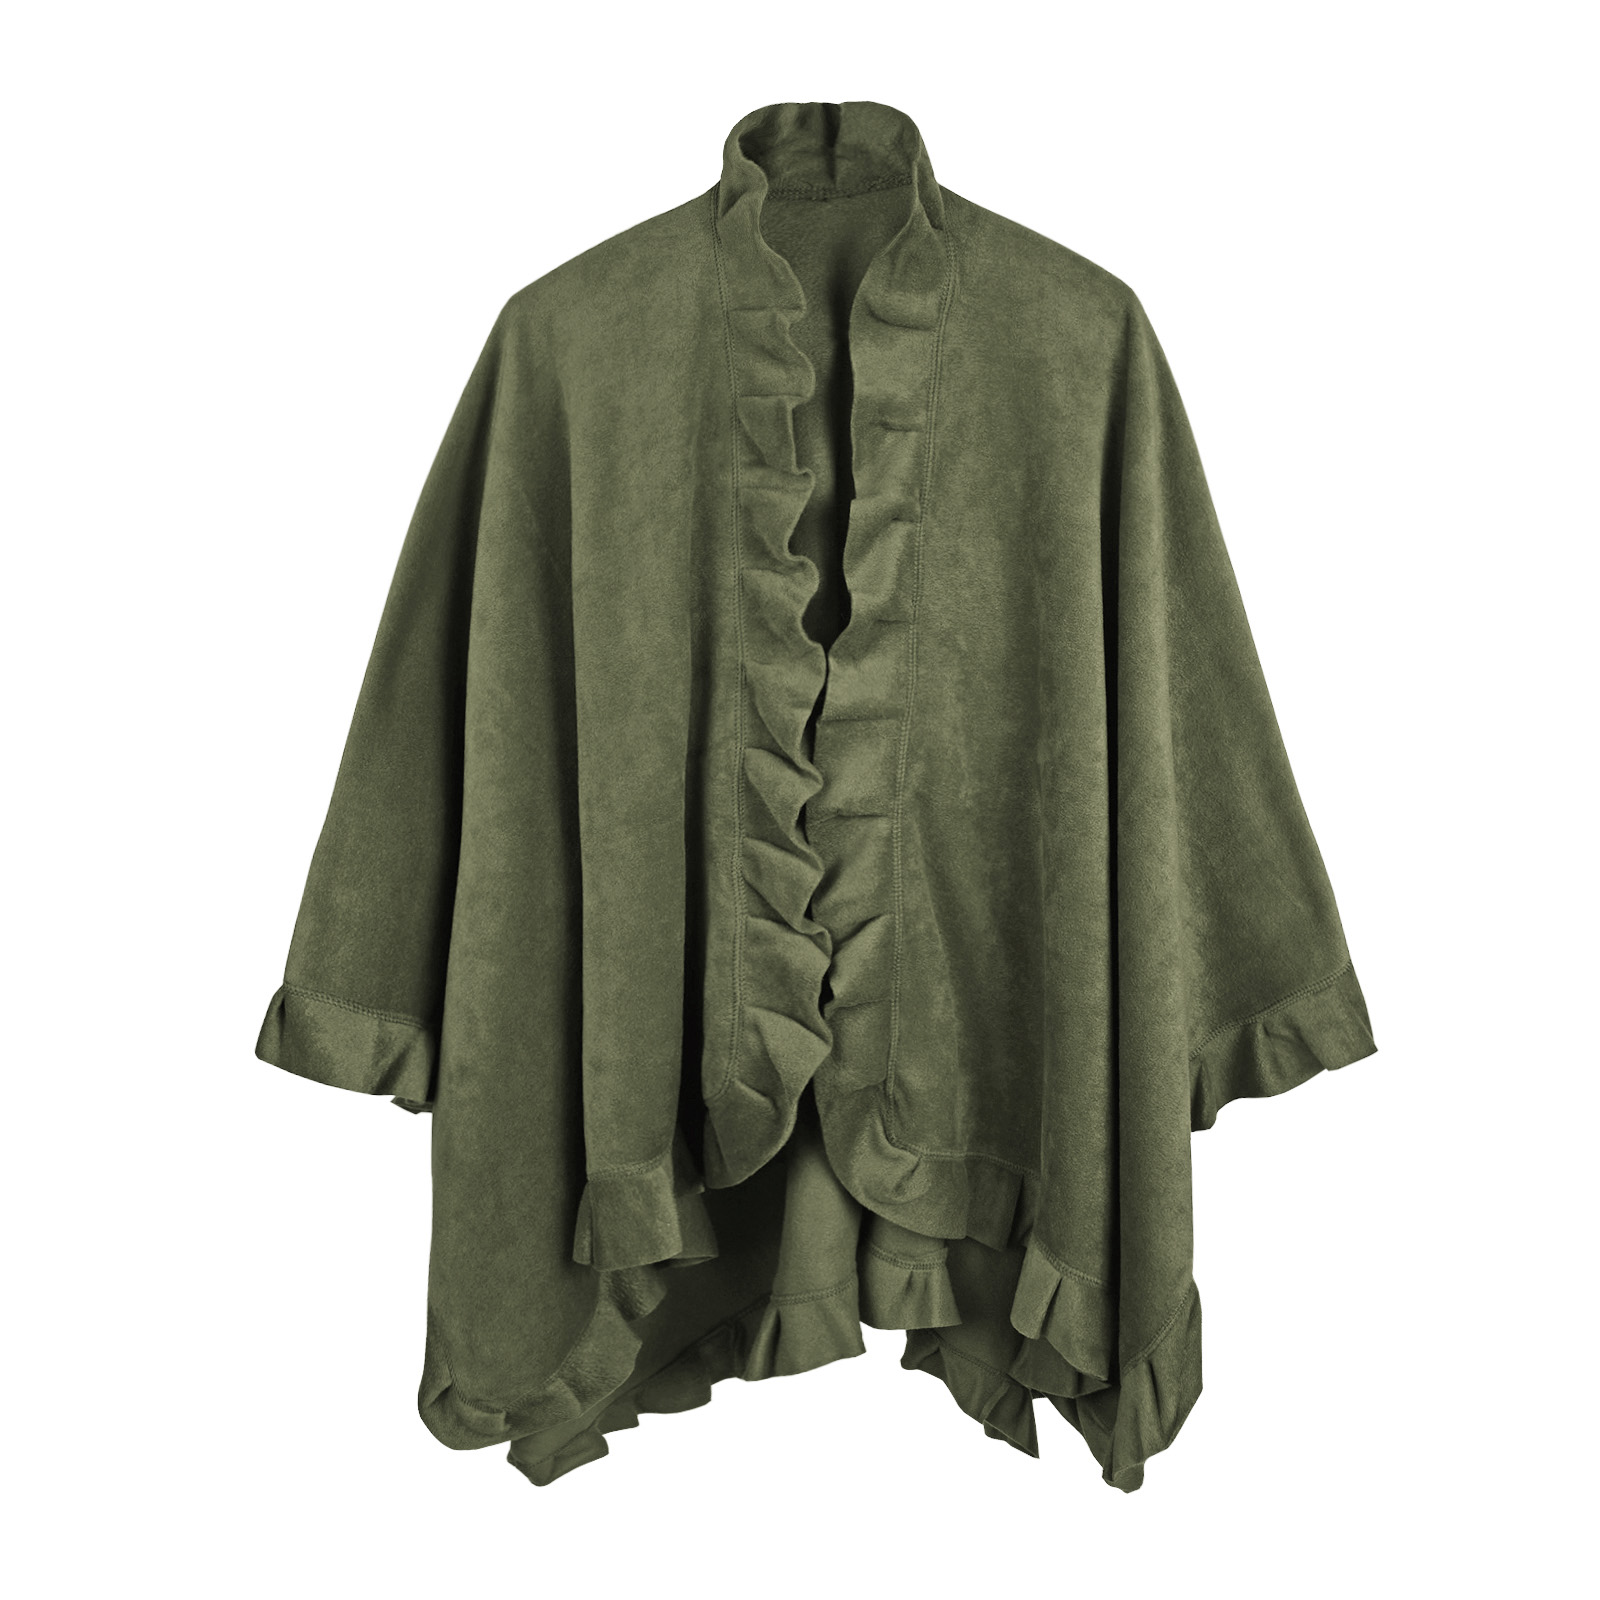 Poncho-femme-polaire-vert-pale--AT-06797_F12-1--